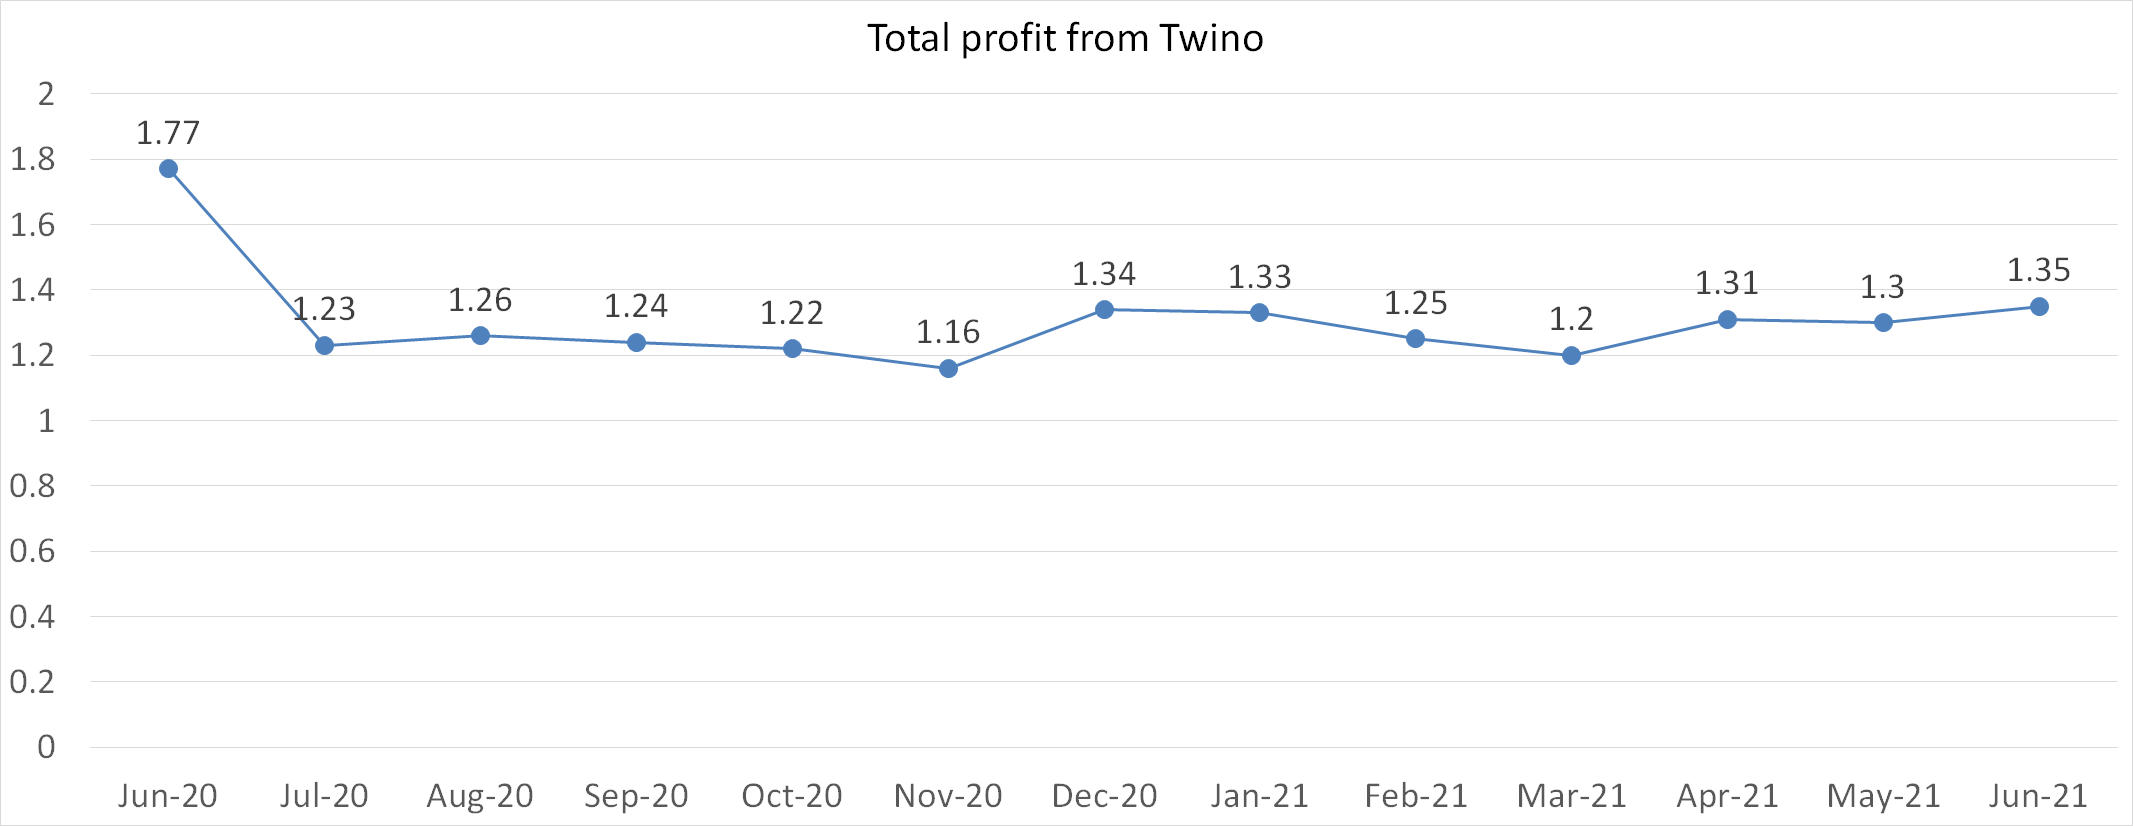 Total profit from Twino june 2021